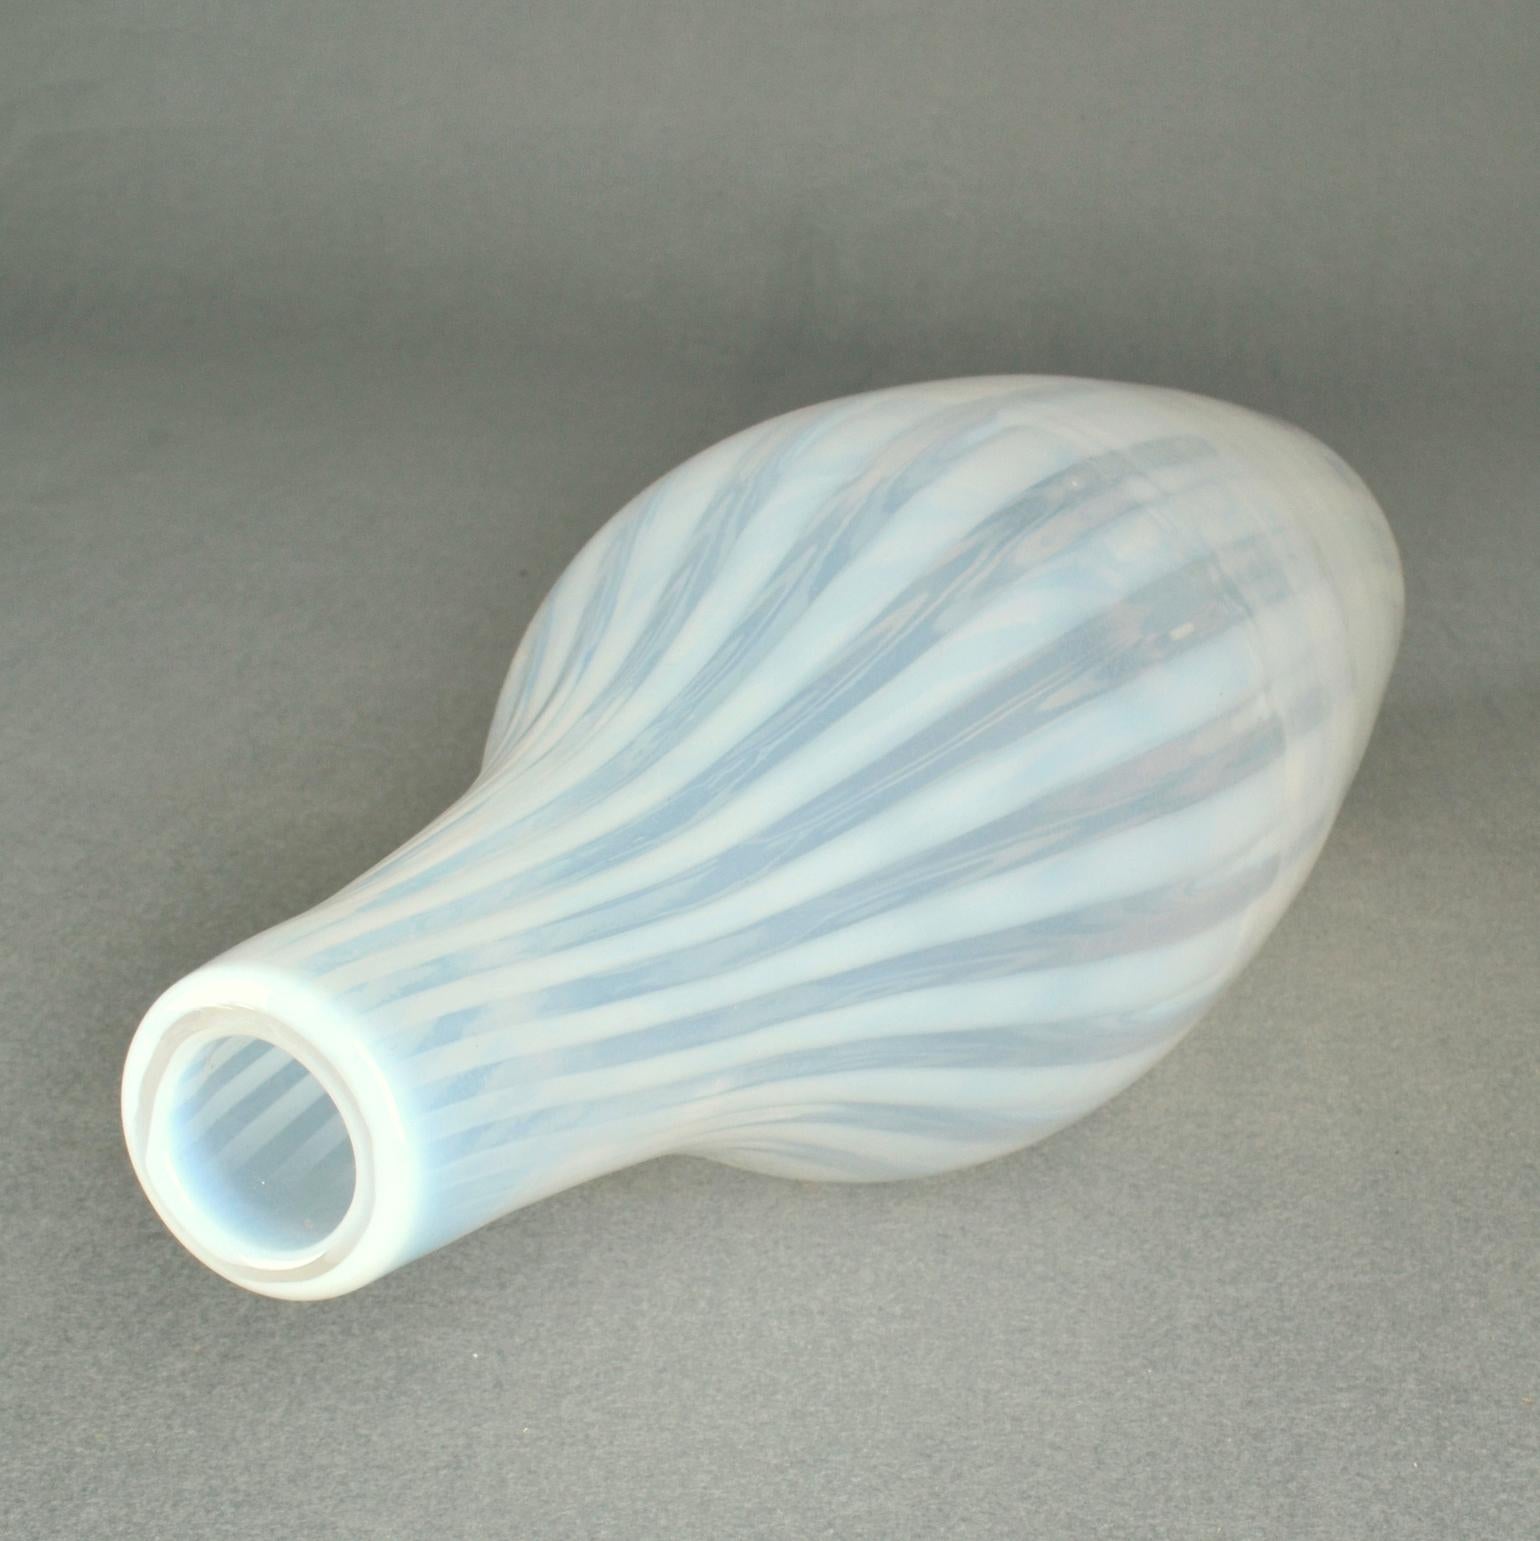 Blue and White Hand Blown Vases by Leerdam, 1960s For Sale 2